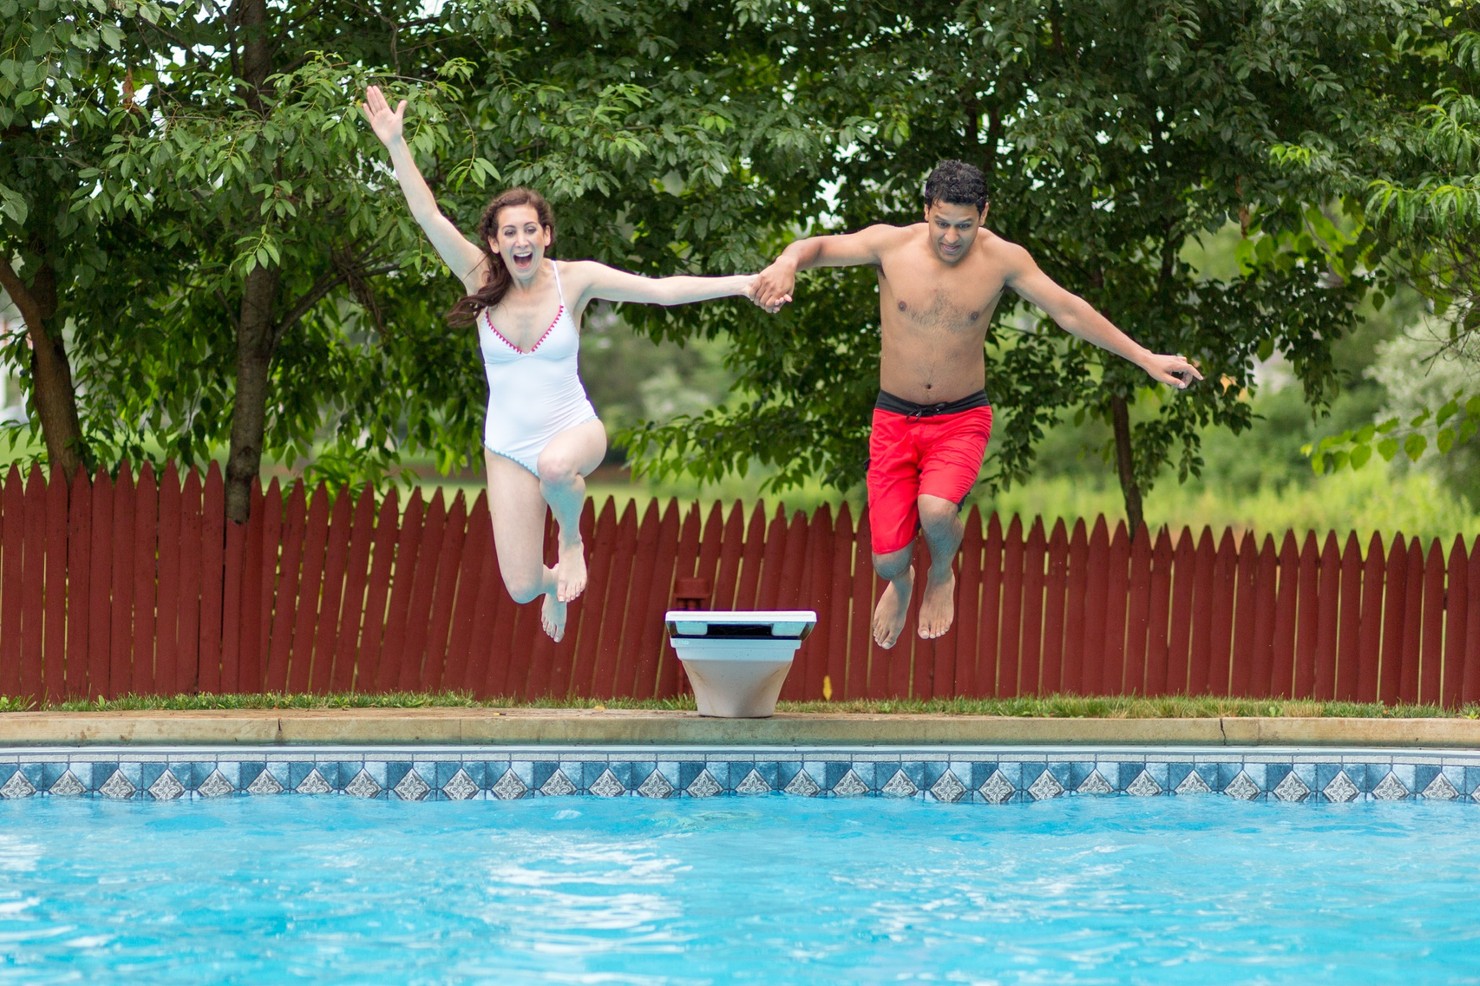 A bride and groom jumping into a swimming pool.